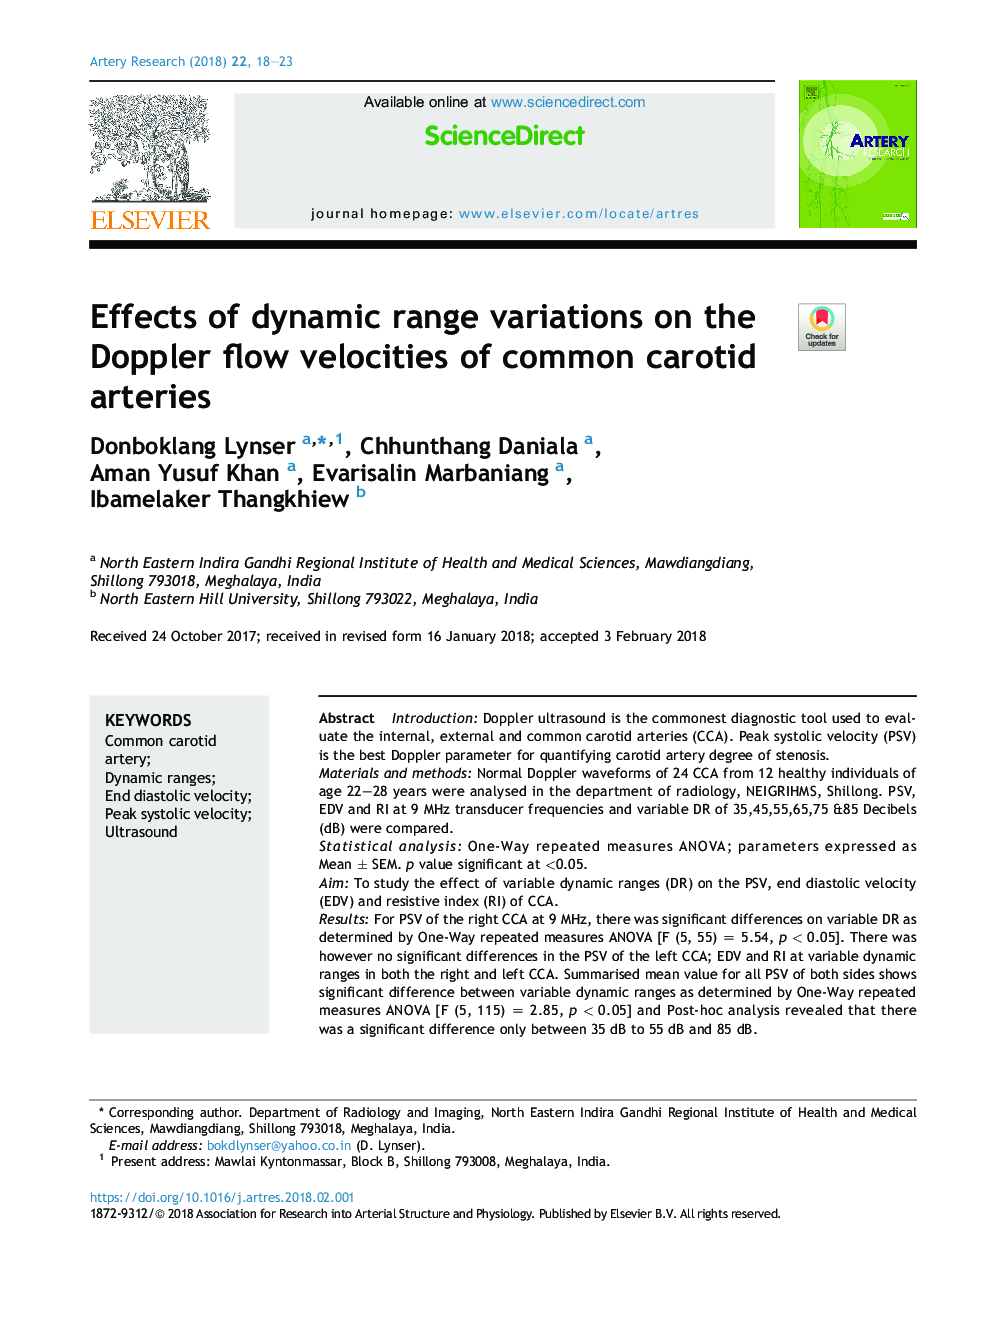 Effects of dynamic range variations on the Doppler flow velocities of common carotid arteries